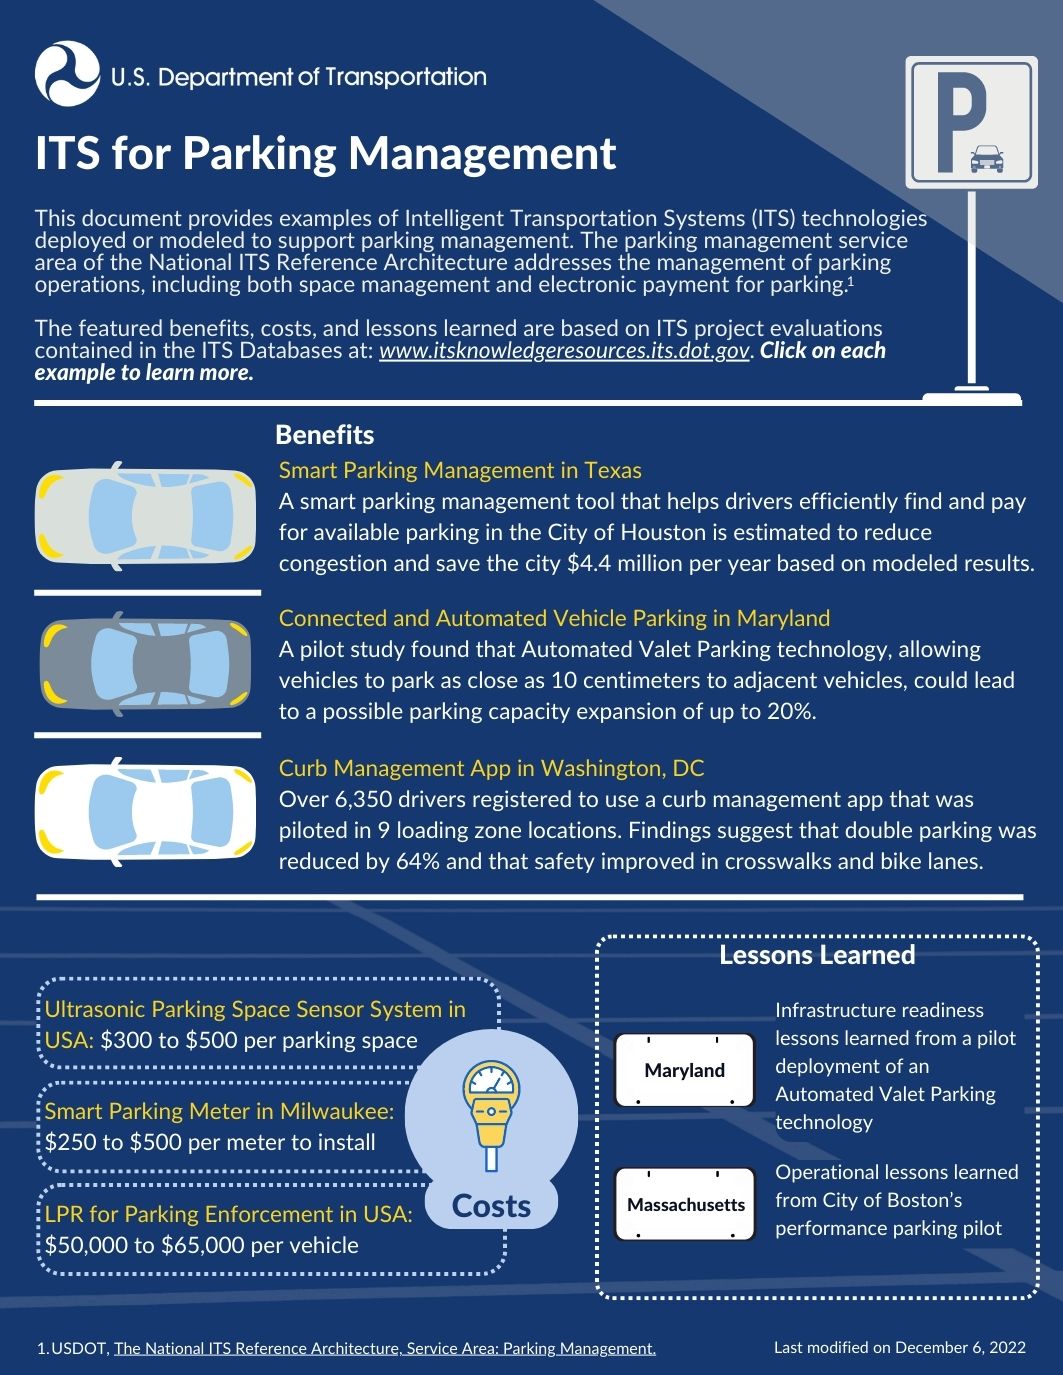 This infographic, featuring benefits of ITS for parking management, including a smart parking management system in Texas, connected and automated vehicle parking technology in Maryland, and a curb management app in Washington, D.C.